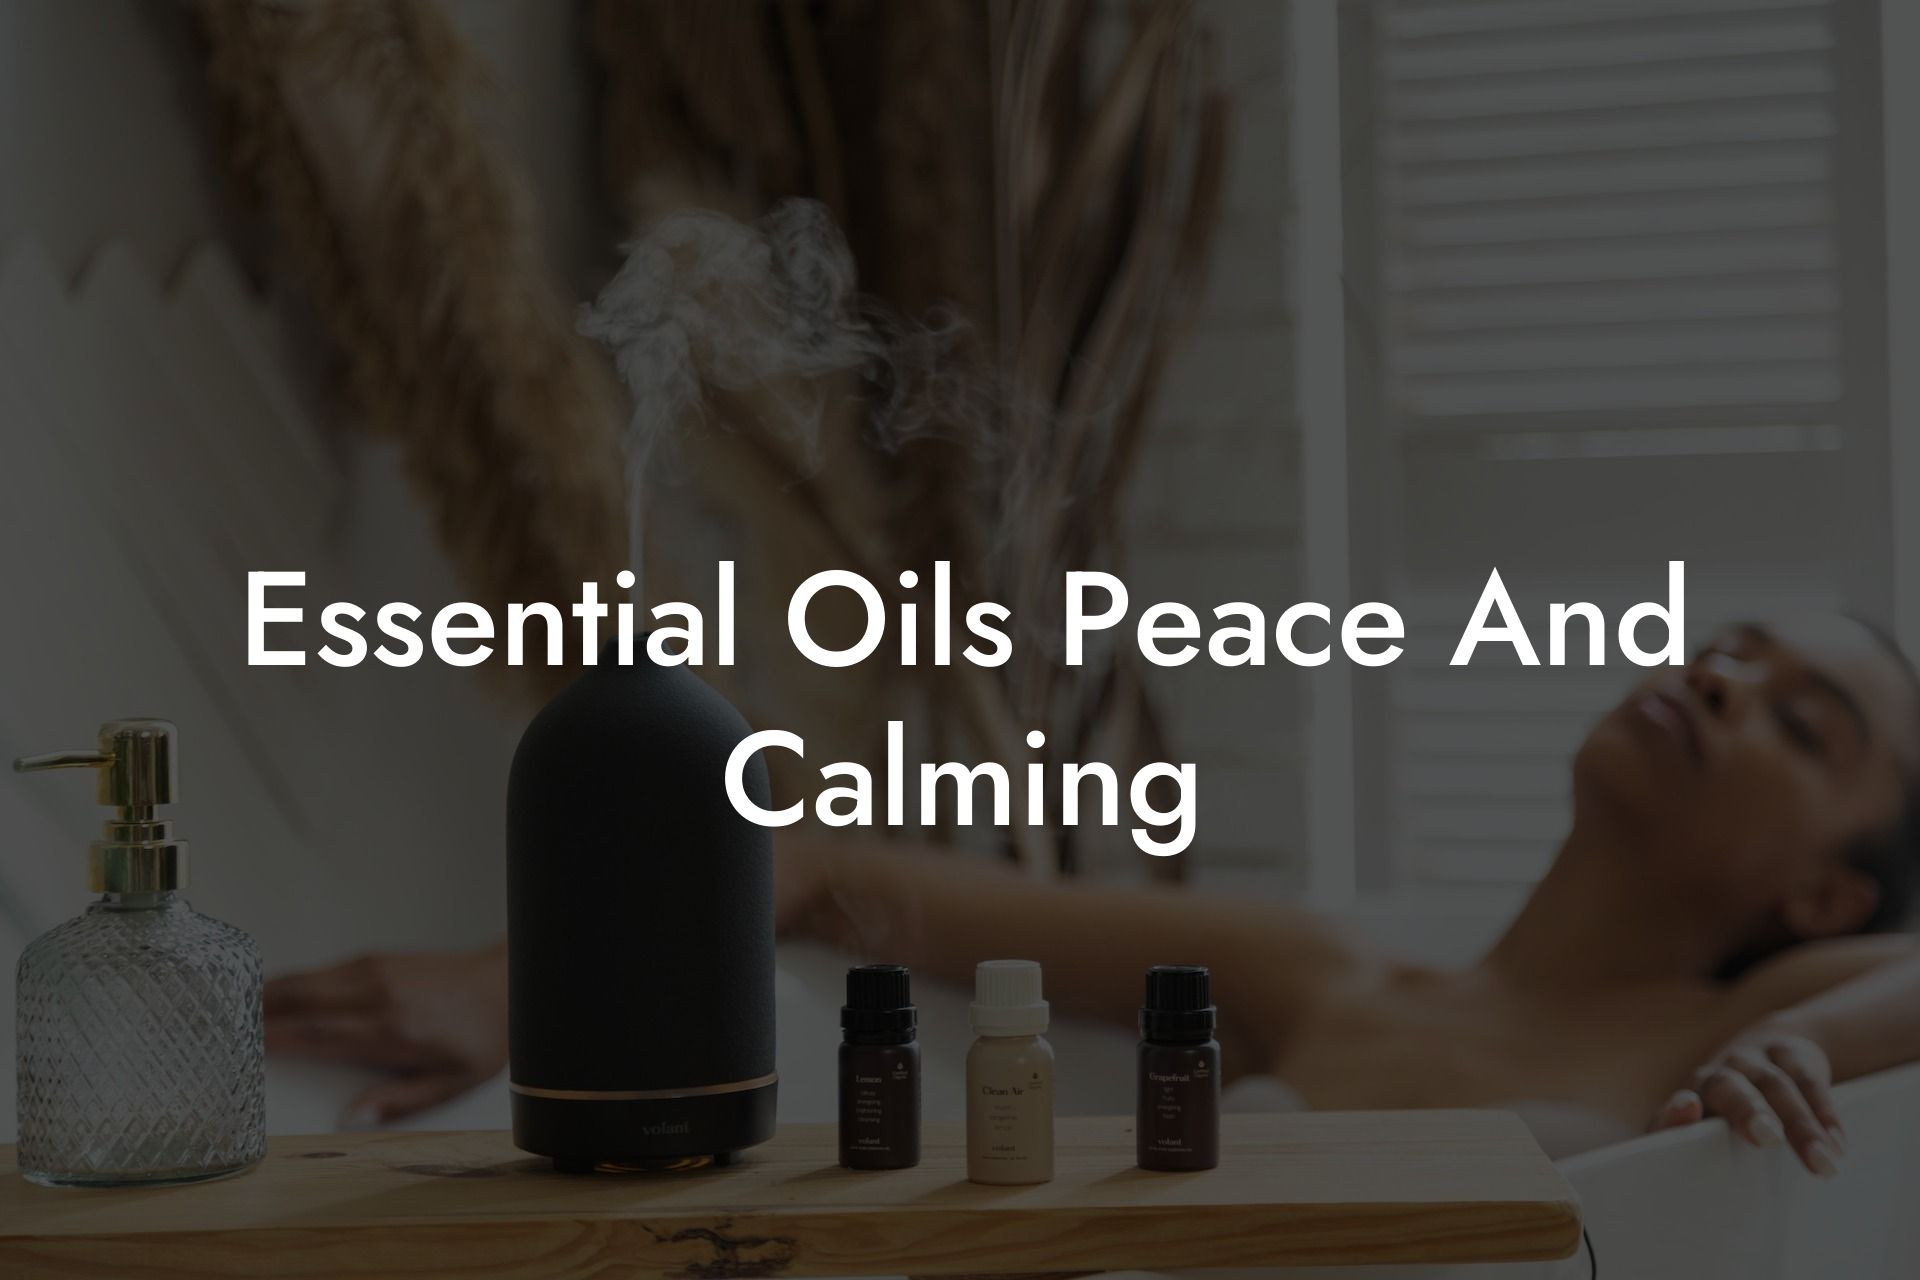 Essential Oils Peace And Calming